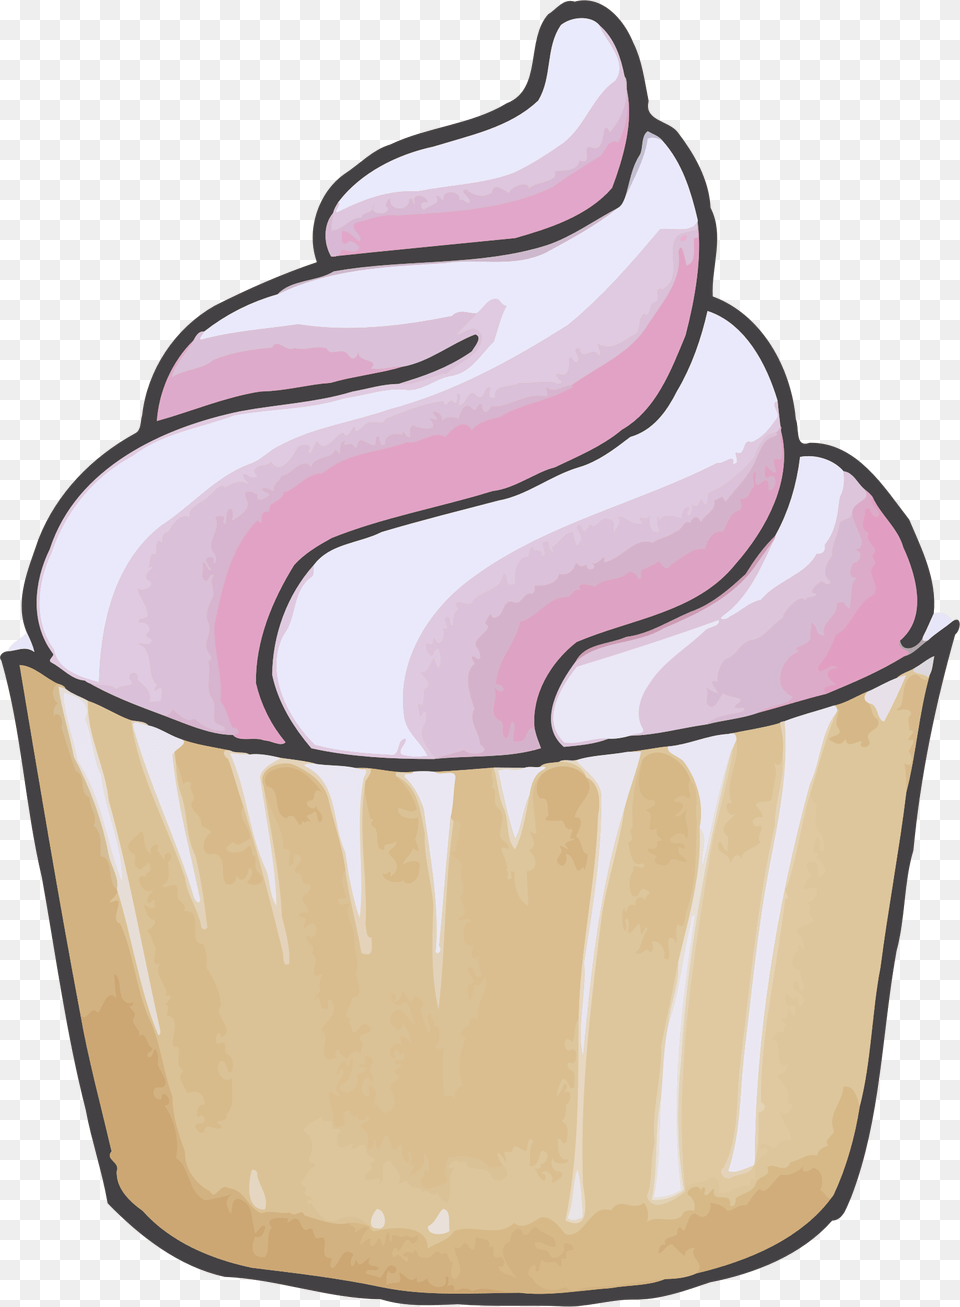 Clipart, Cake, Icing, Food, Dessert Png Image